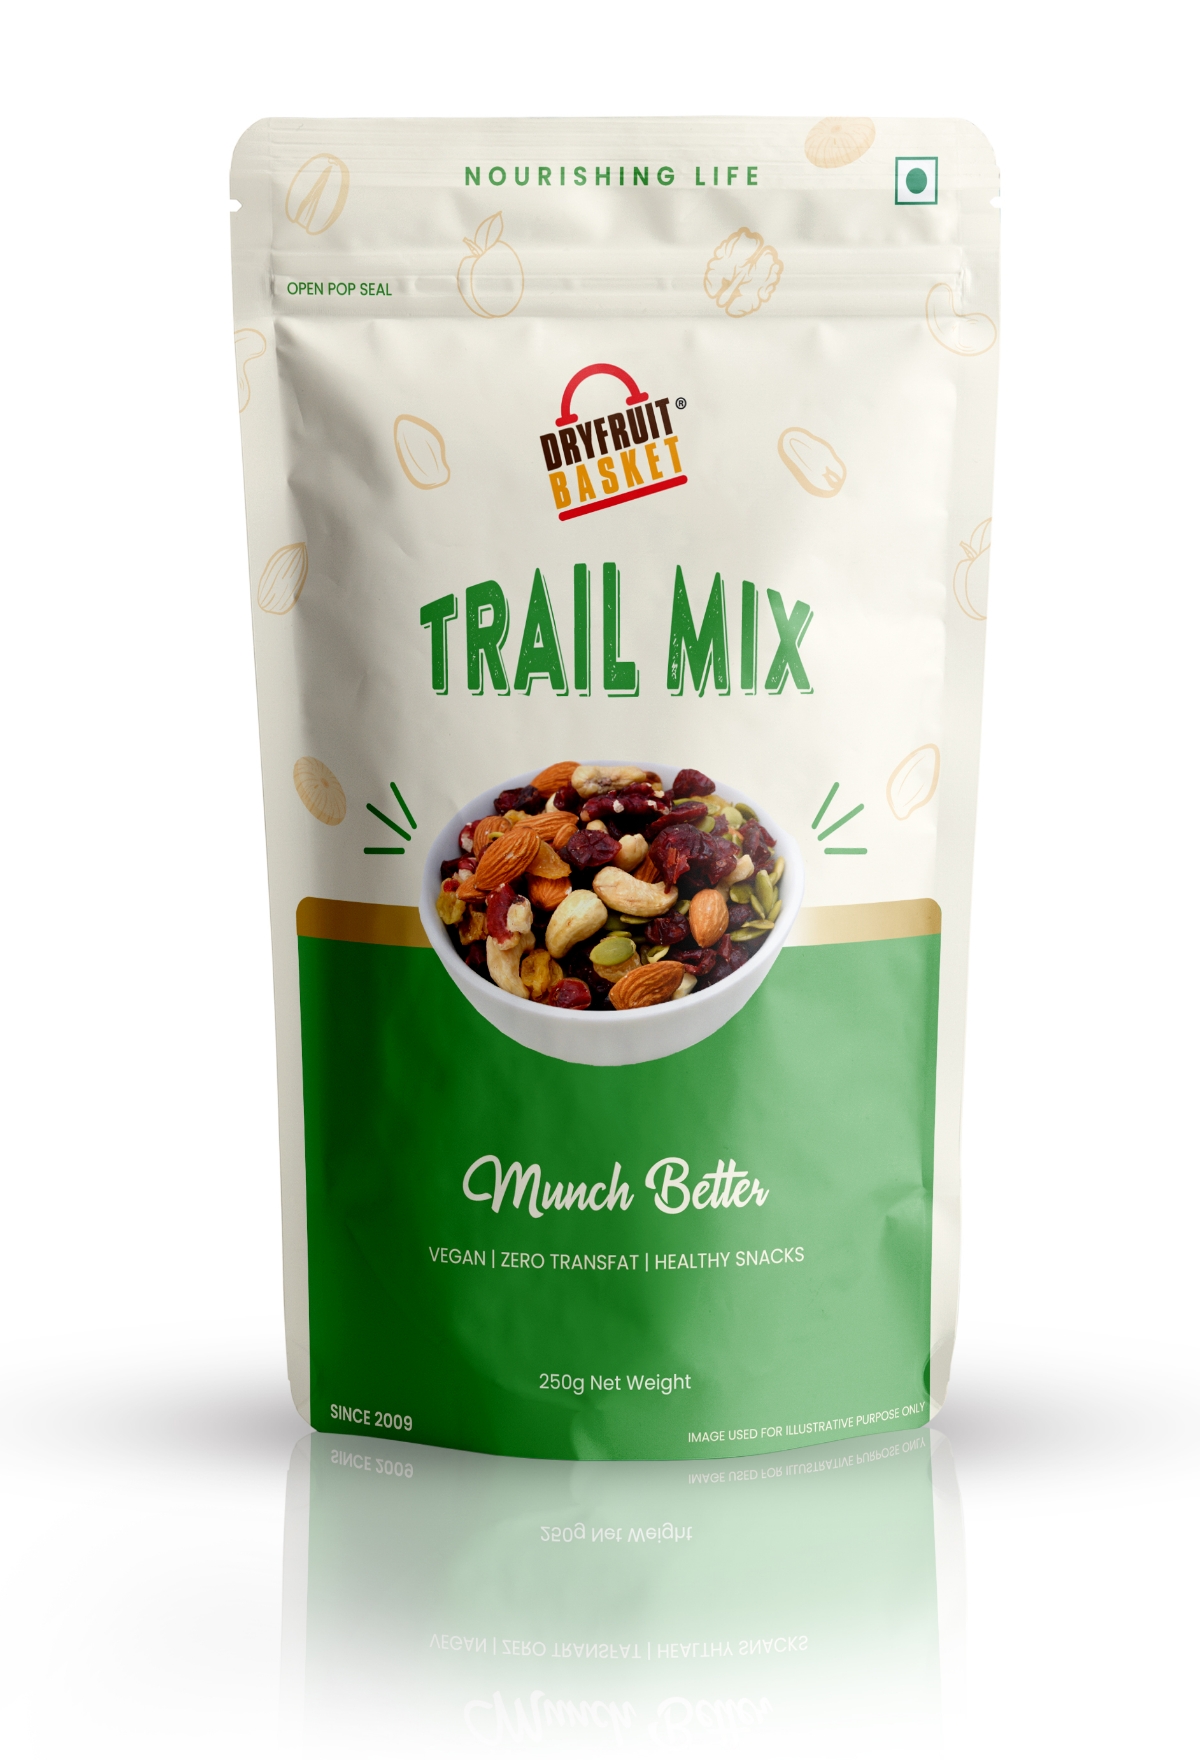 Buy Trail Mix Online